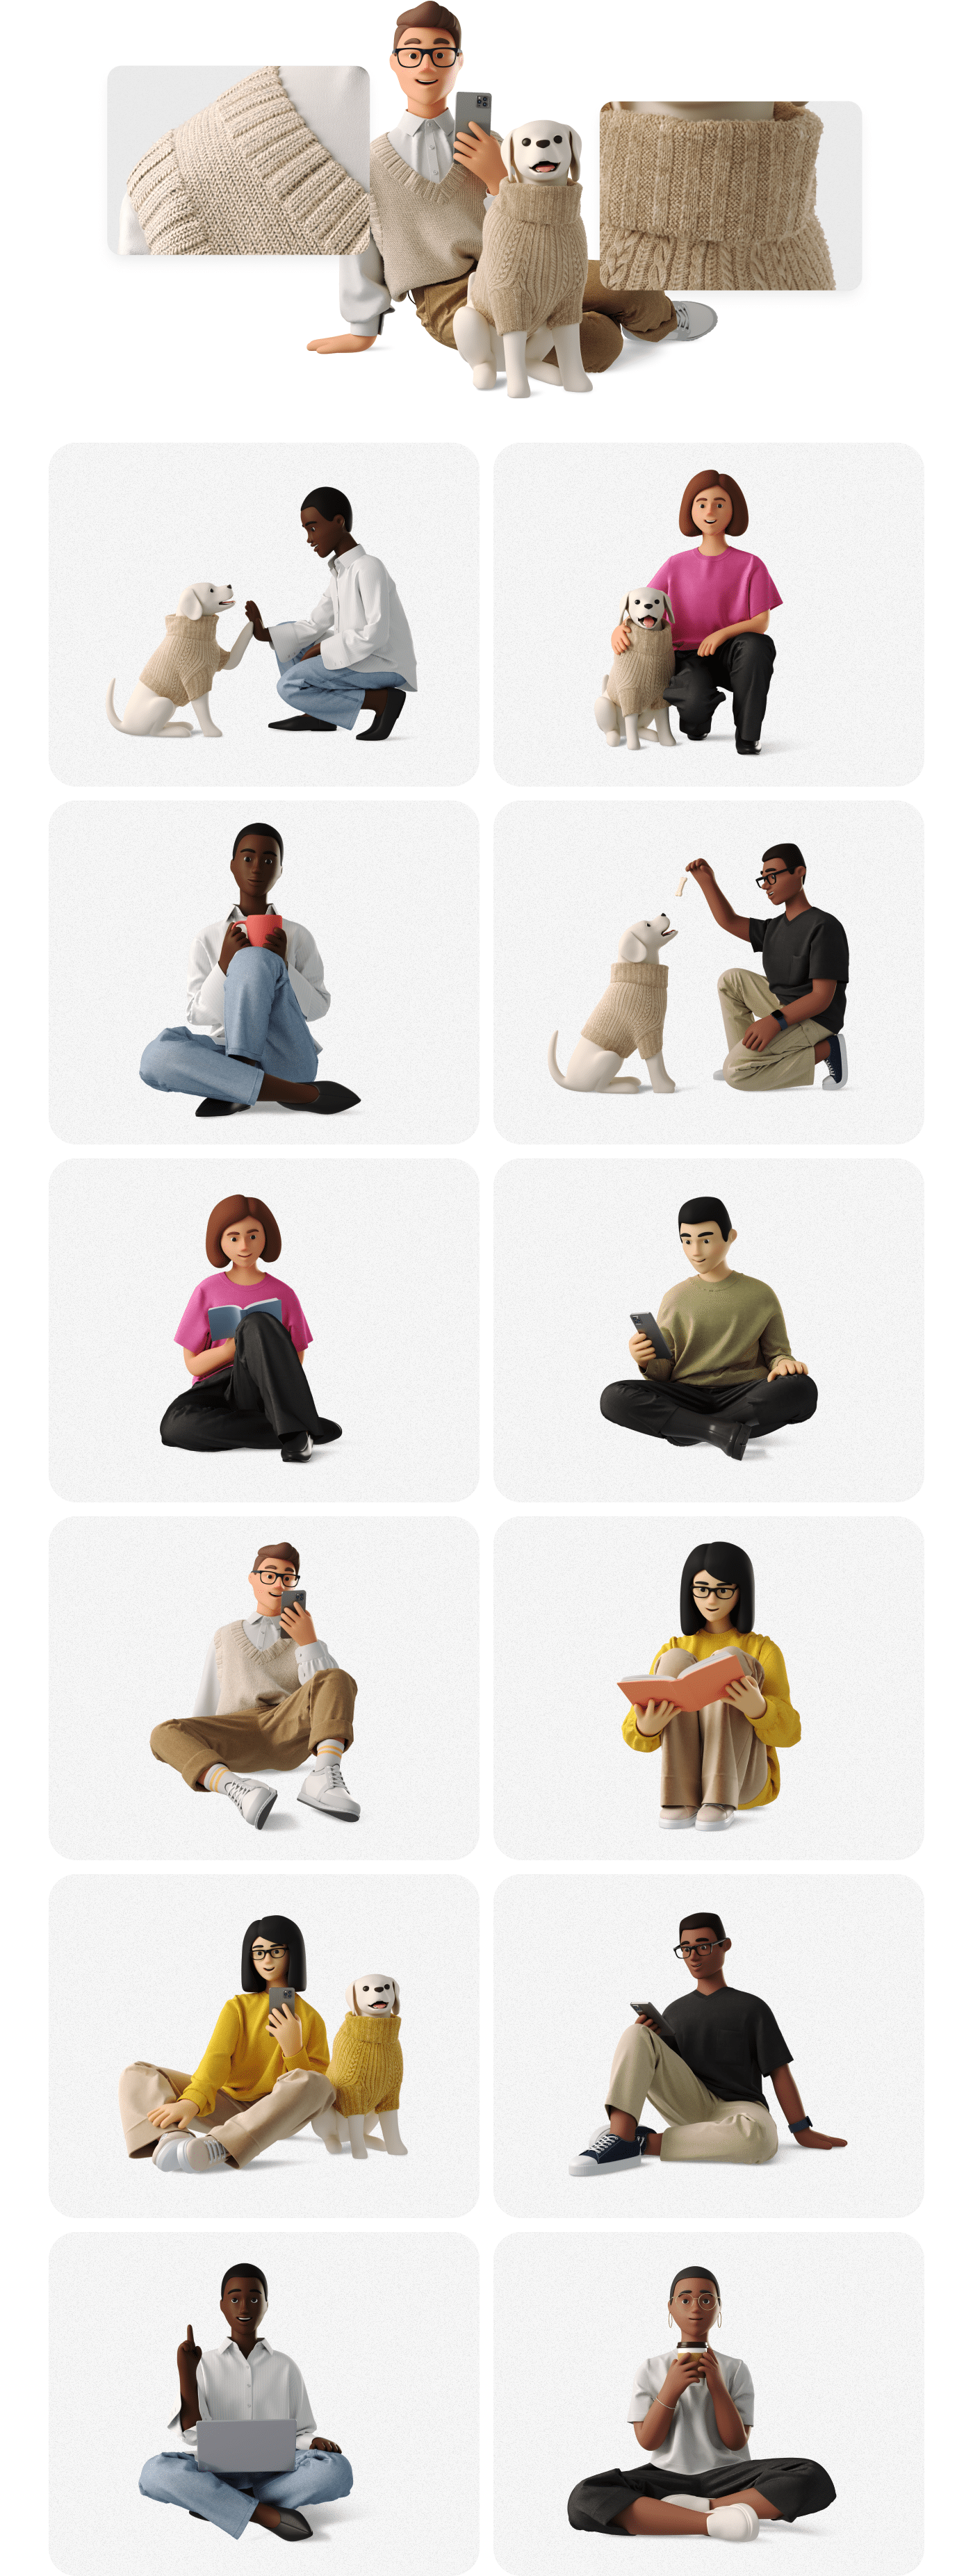 3D casual Character design  characters frendly icons8 ILLUSTRATION 